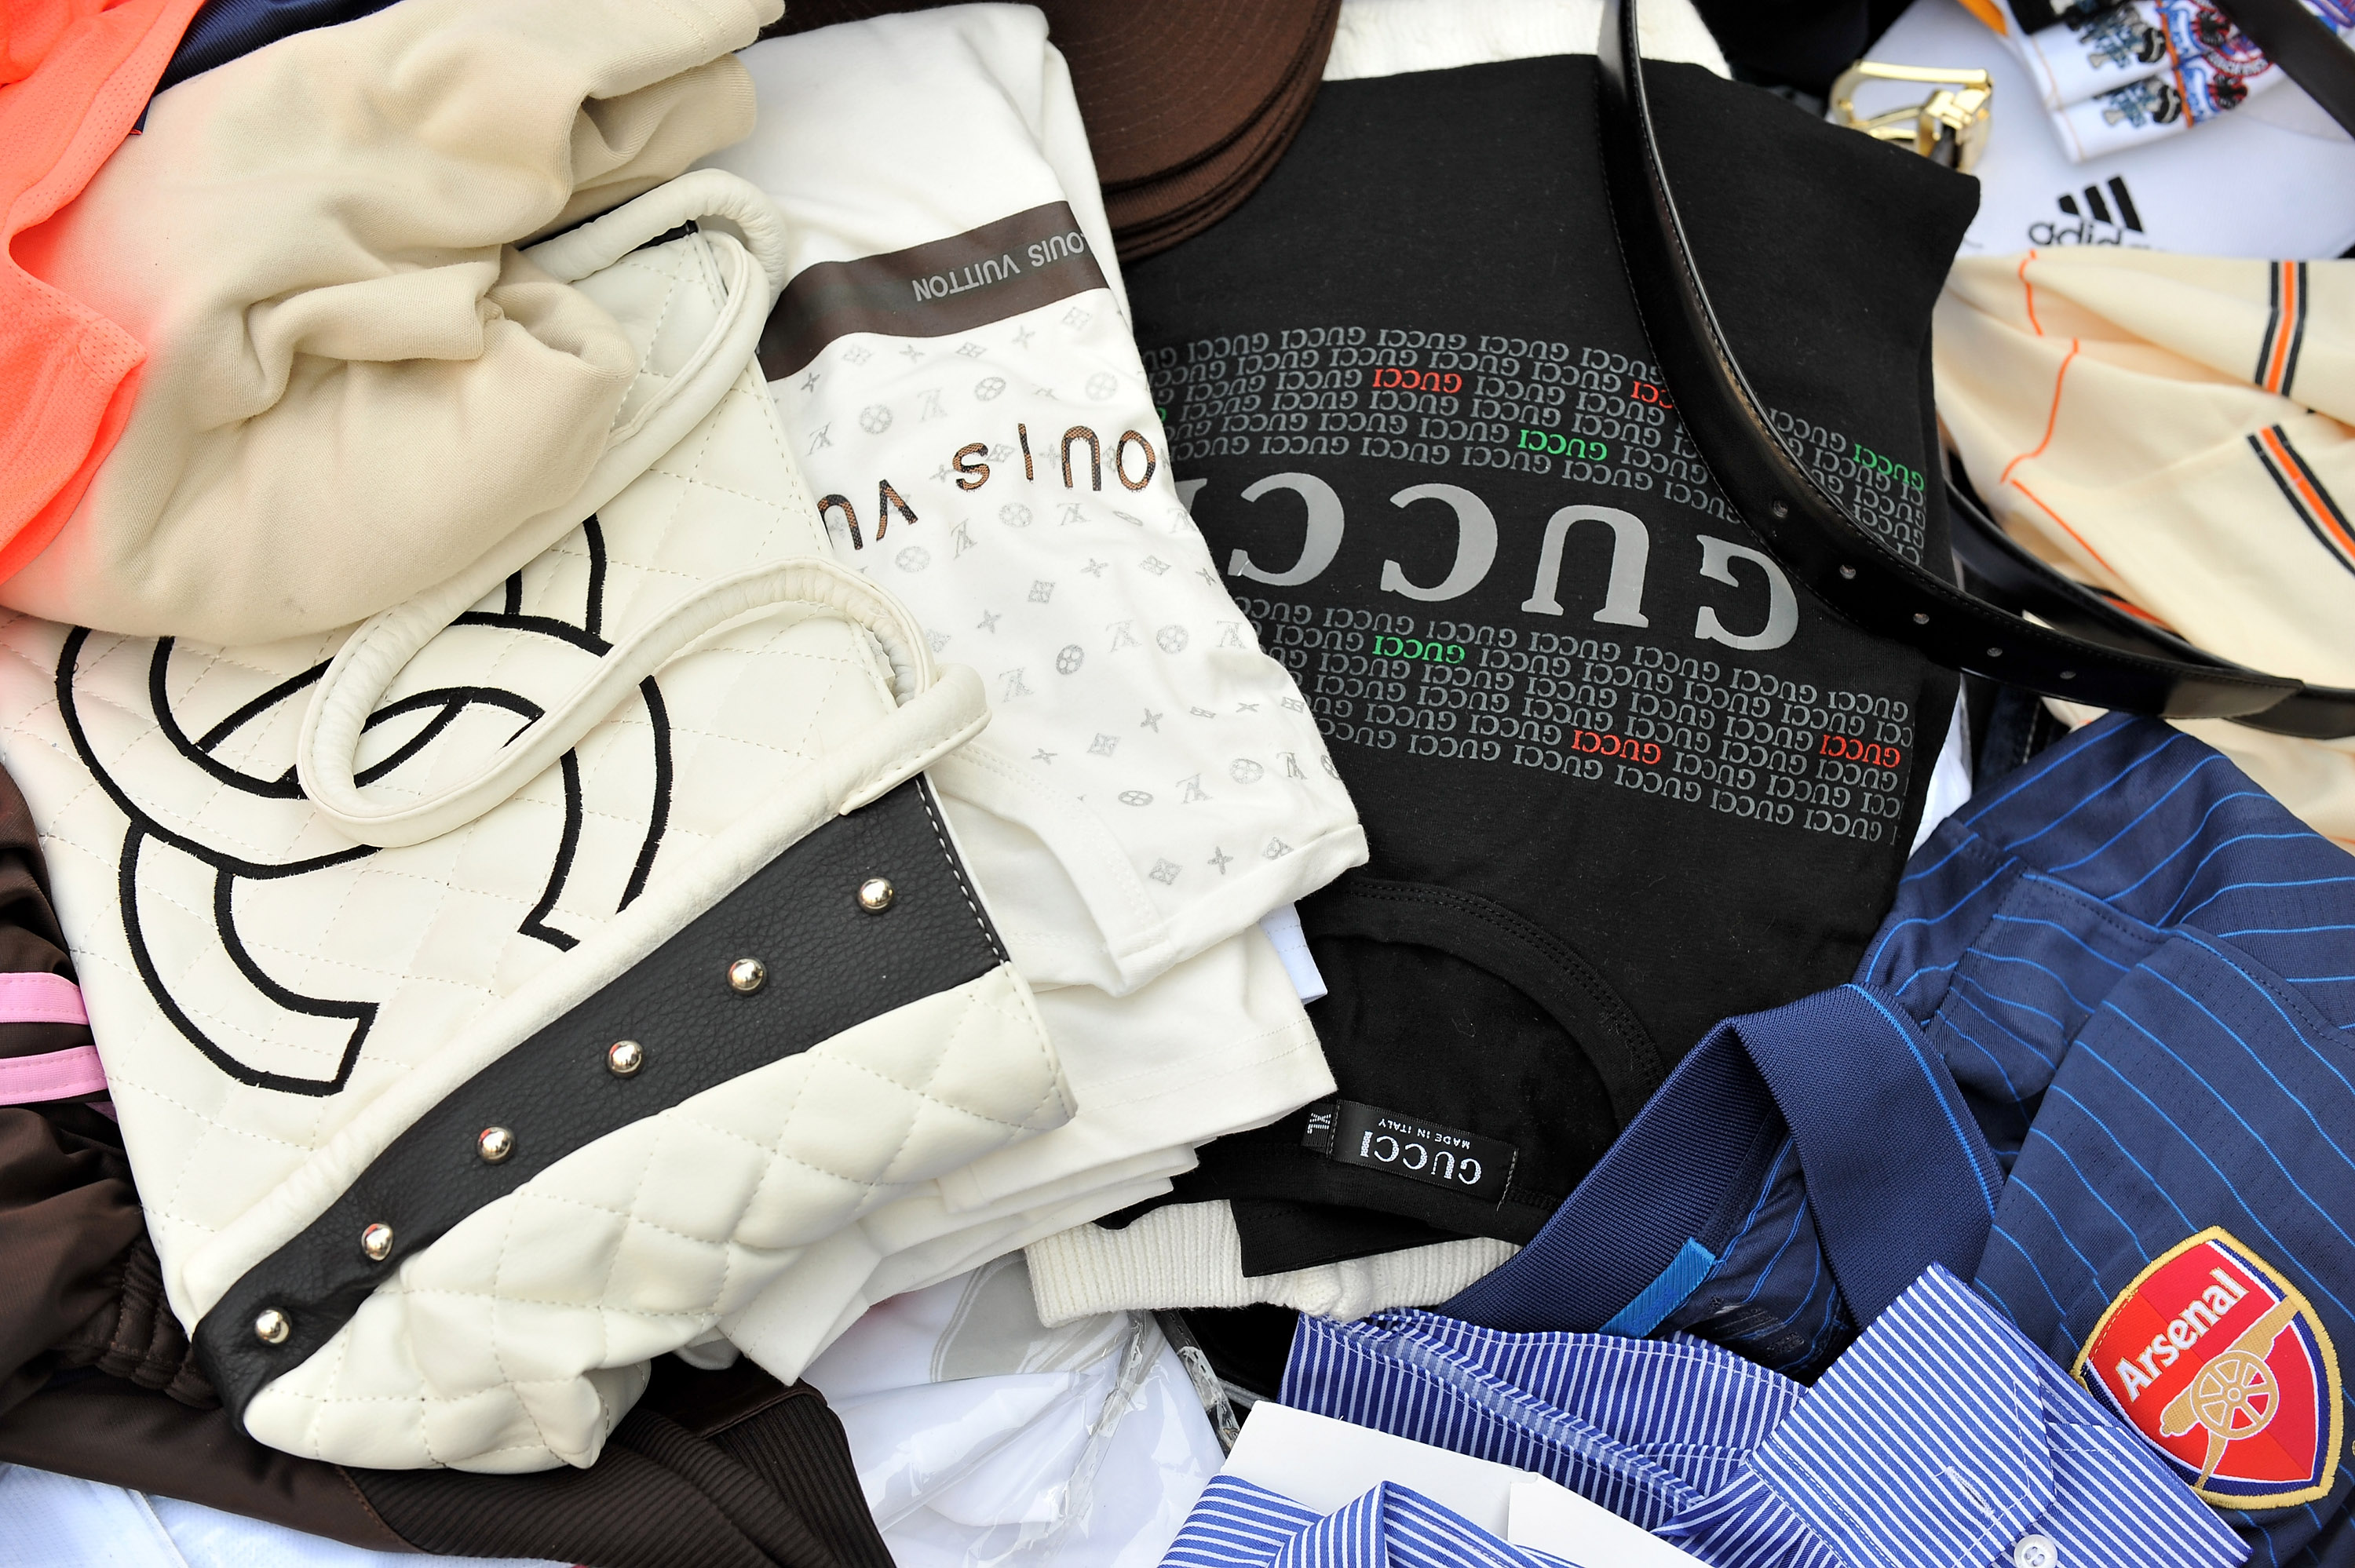 Global counterfeiting costs luxury brands billions of dollars